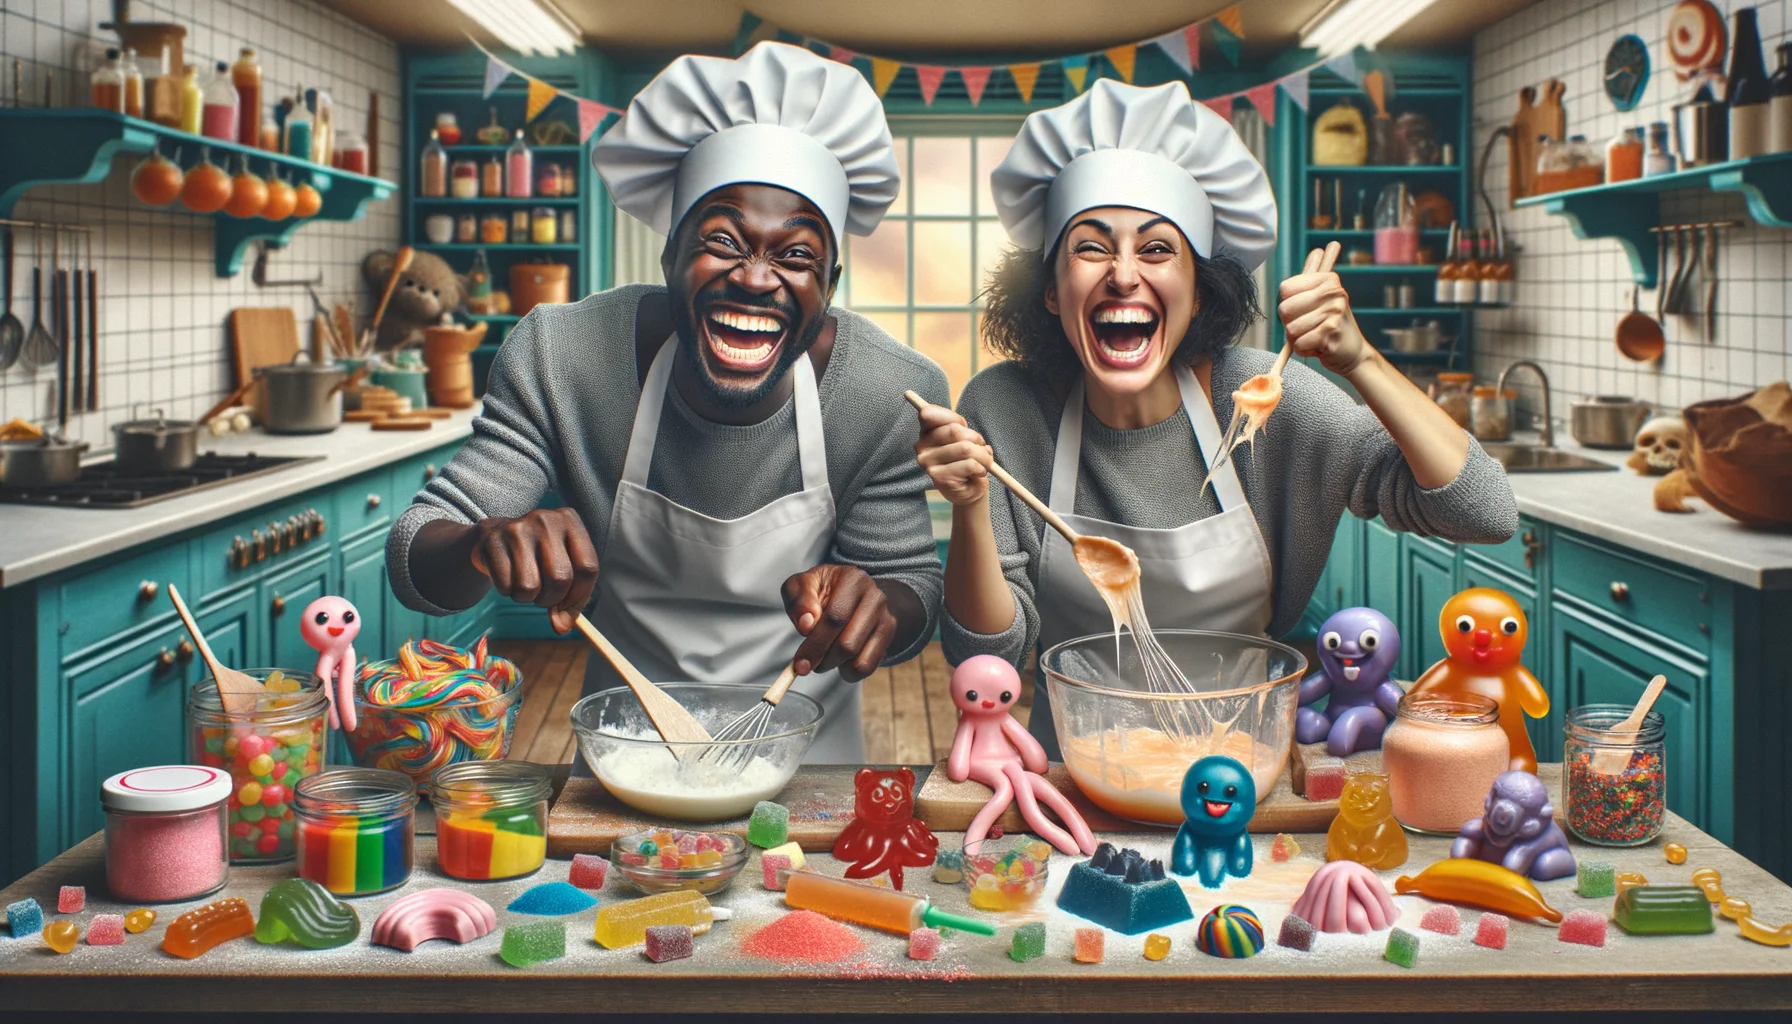 Create a humorous, realistic image that depicts a delightful scenario of 'Candy Crafting'. The scene is set in a brightly-lit kitchen filled with various candy-making equipment. A station is set up with ingredients like coloured sugars, gelatine, and flavorings. A Black man and a Hispanic woman, both wearing chef's aprons and funny hats, are joyfully making different shapes of candies, but their attempts are imperfect, leading to unusual shapes and uncontrollable laughter. On the table, there are candies in the shape of various creatures with misshapen bodies. Their delighted and infectious laughter fills up the room.